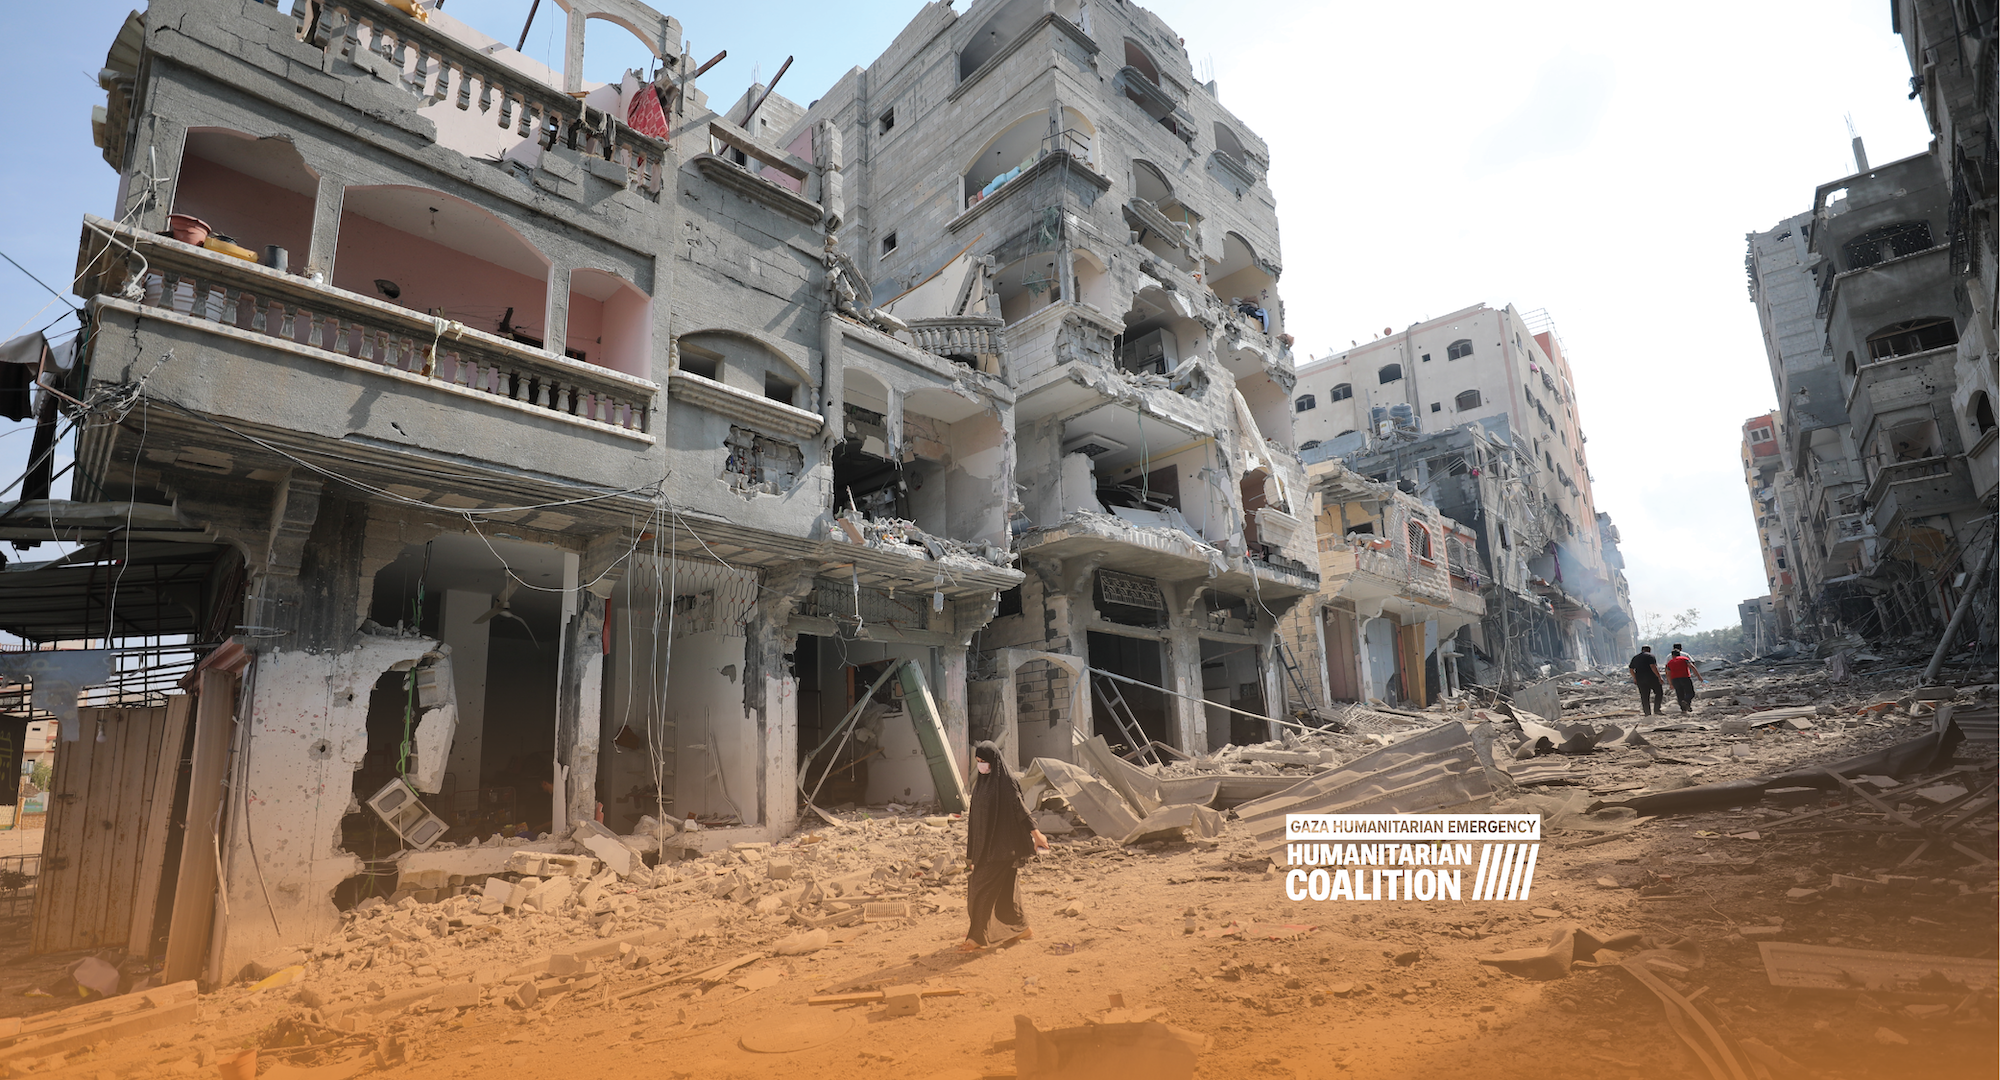 A woman walking by ruined buildings with an overlay of the Humanitarian Coalition logo